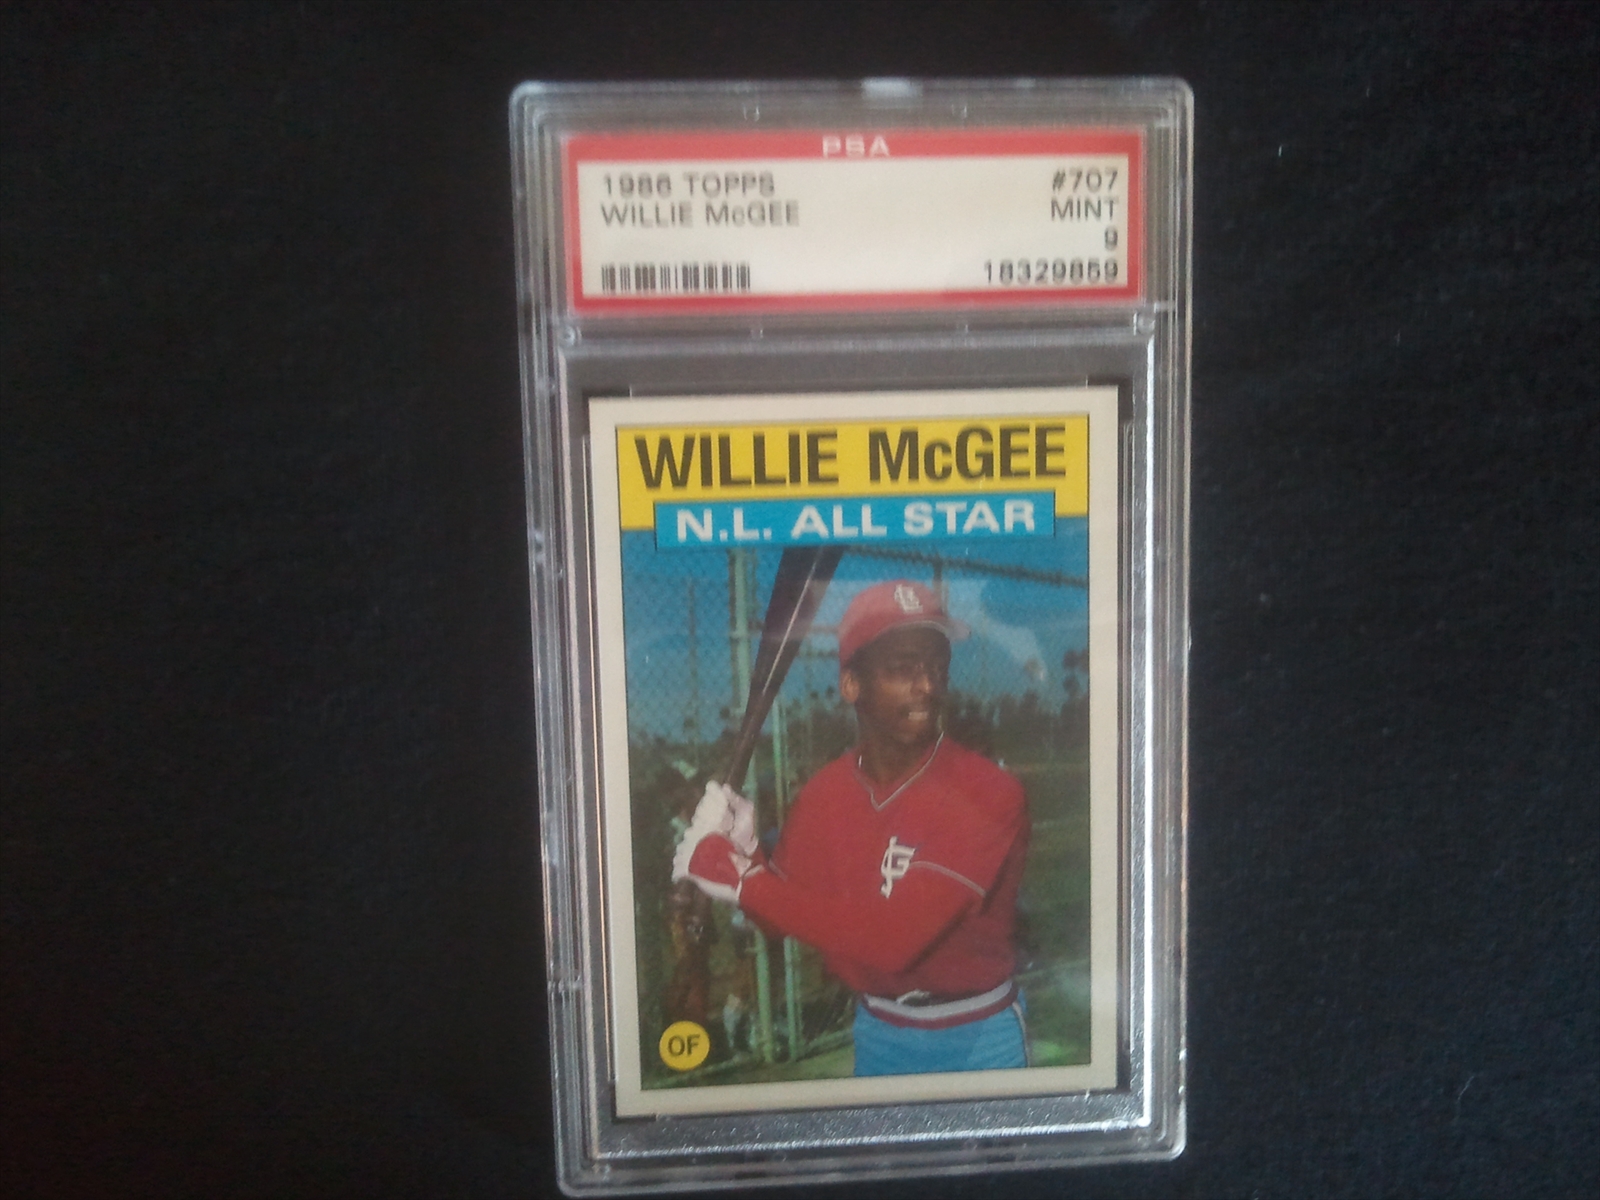 1986 Topps Baseball # 707 NL All Star Willie McGee Outfield